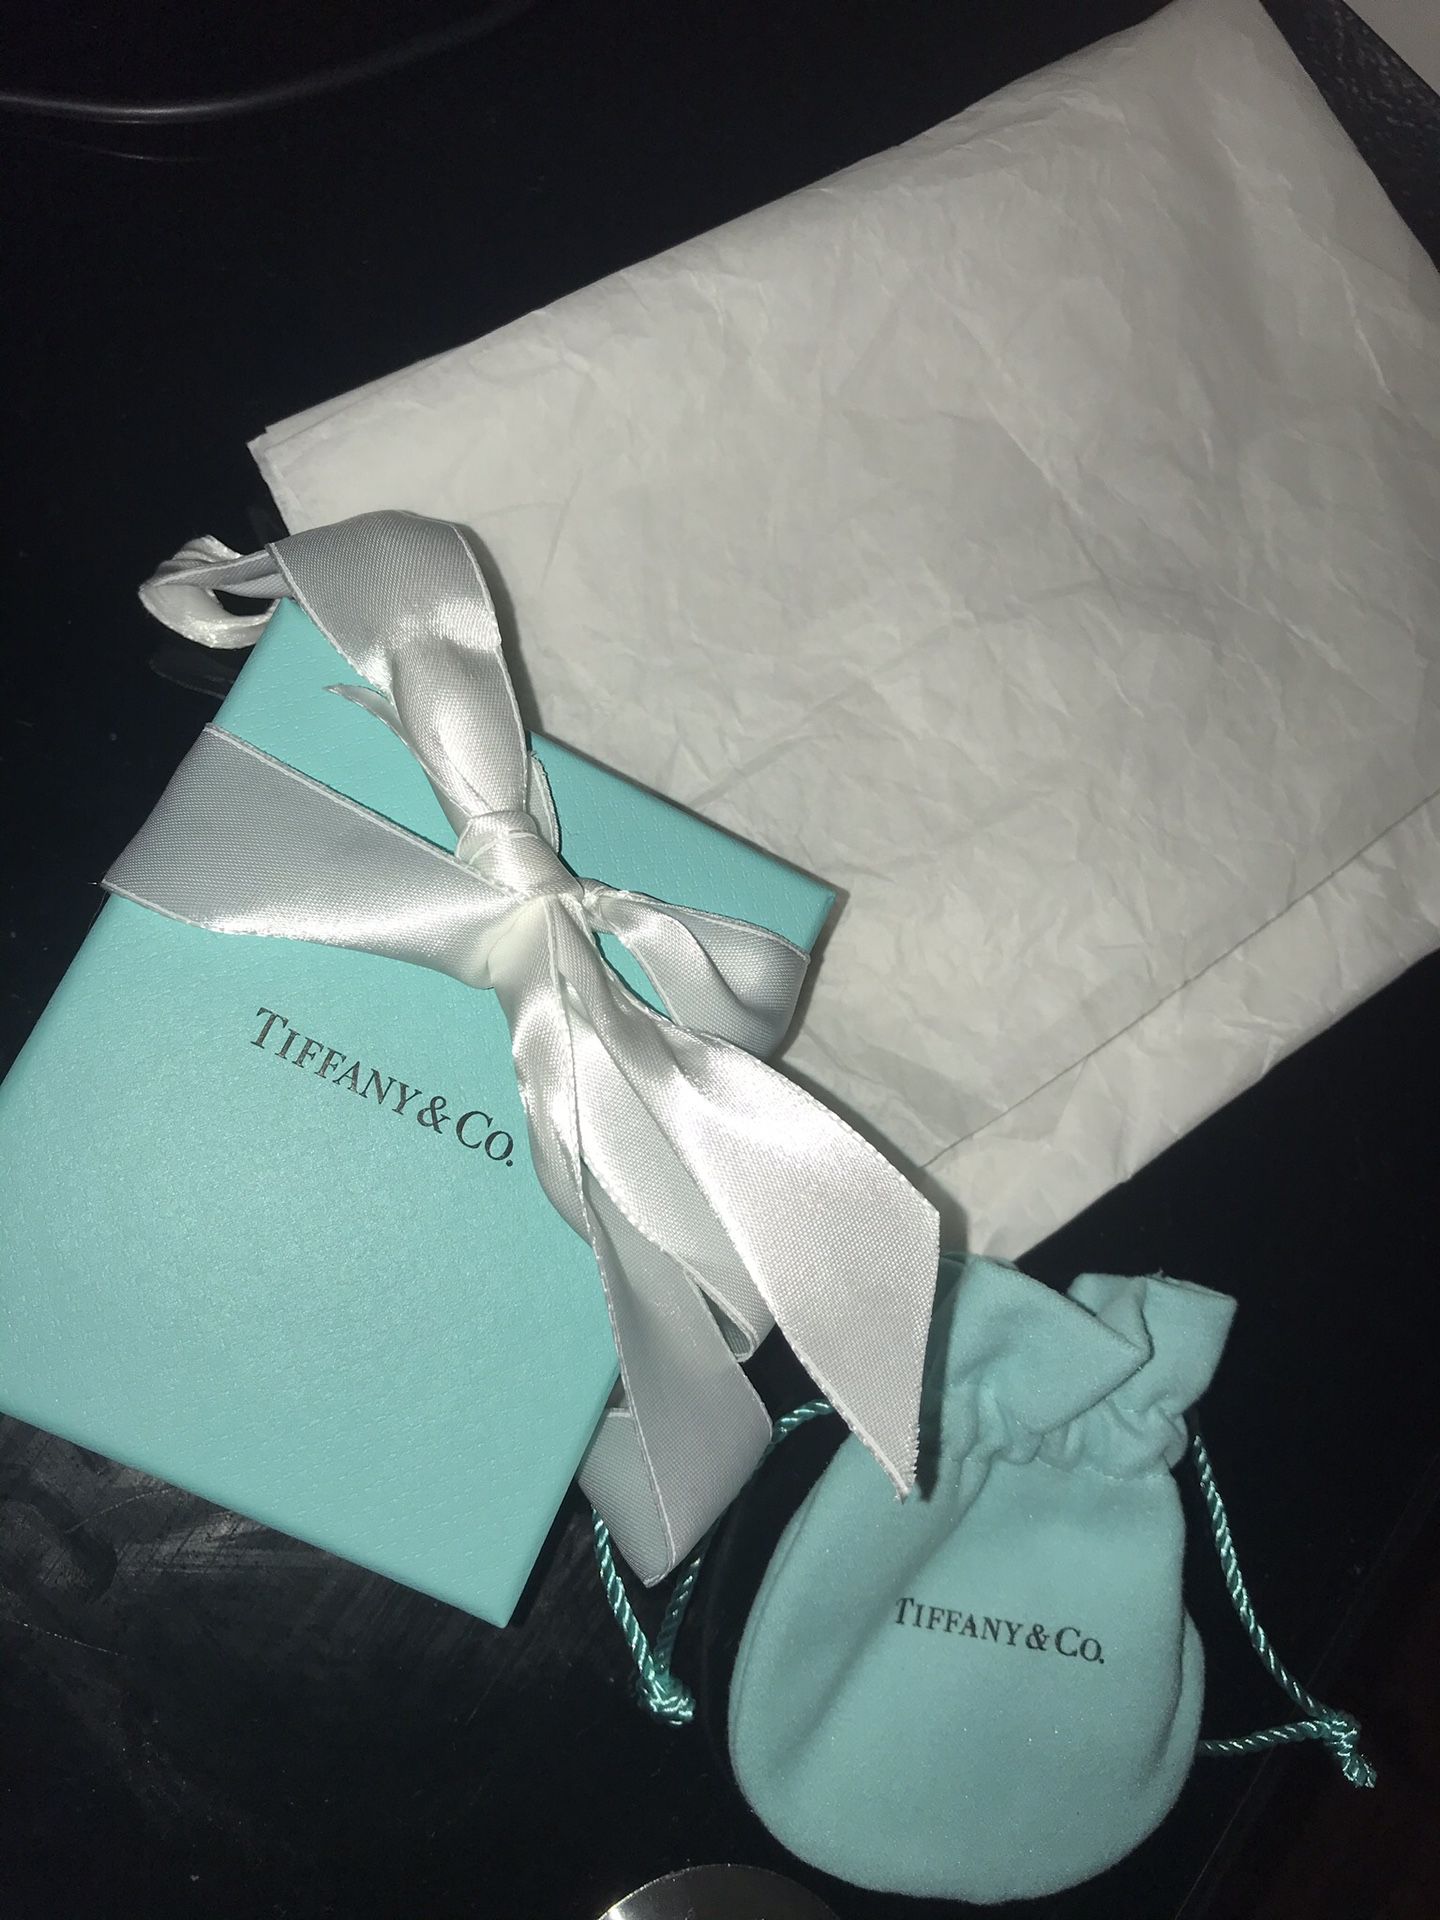 TIFFANY&CO Jewelry Box With Pouch